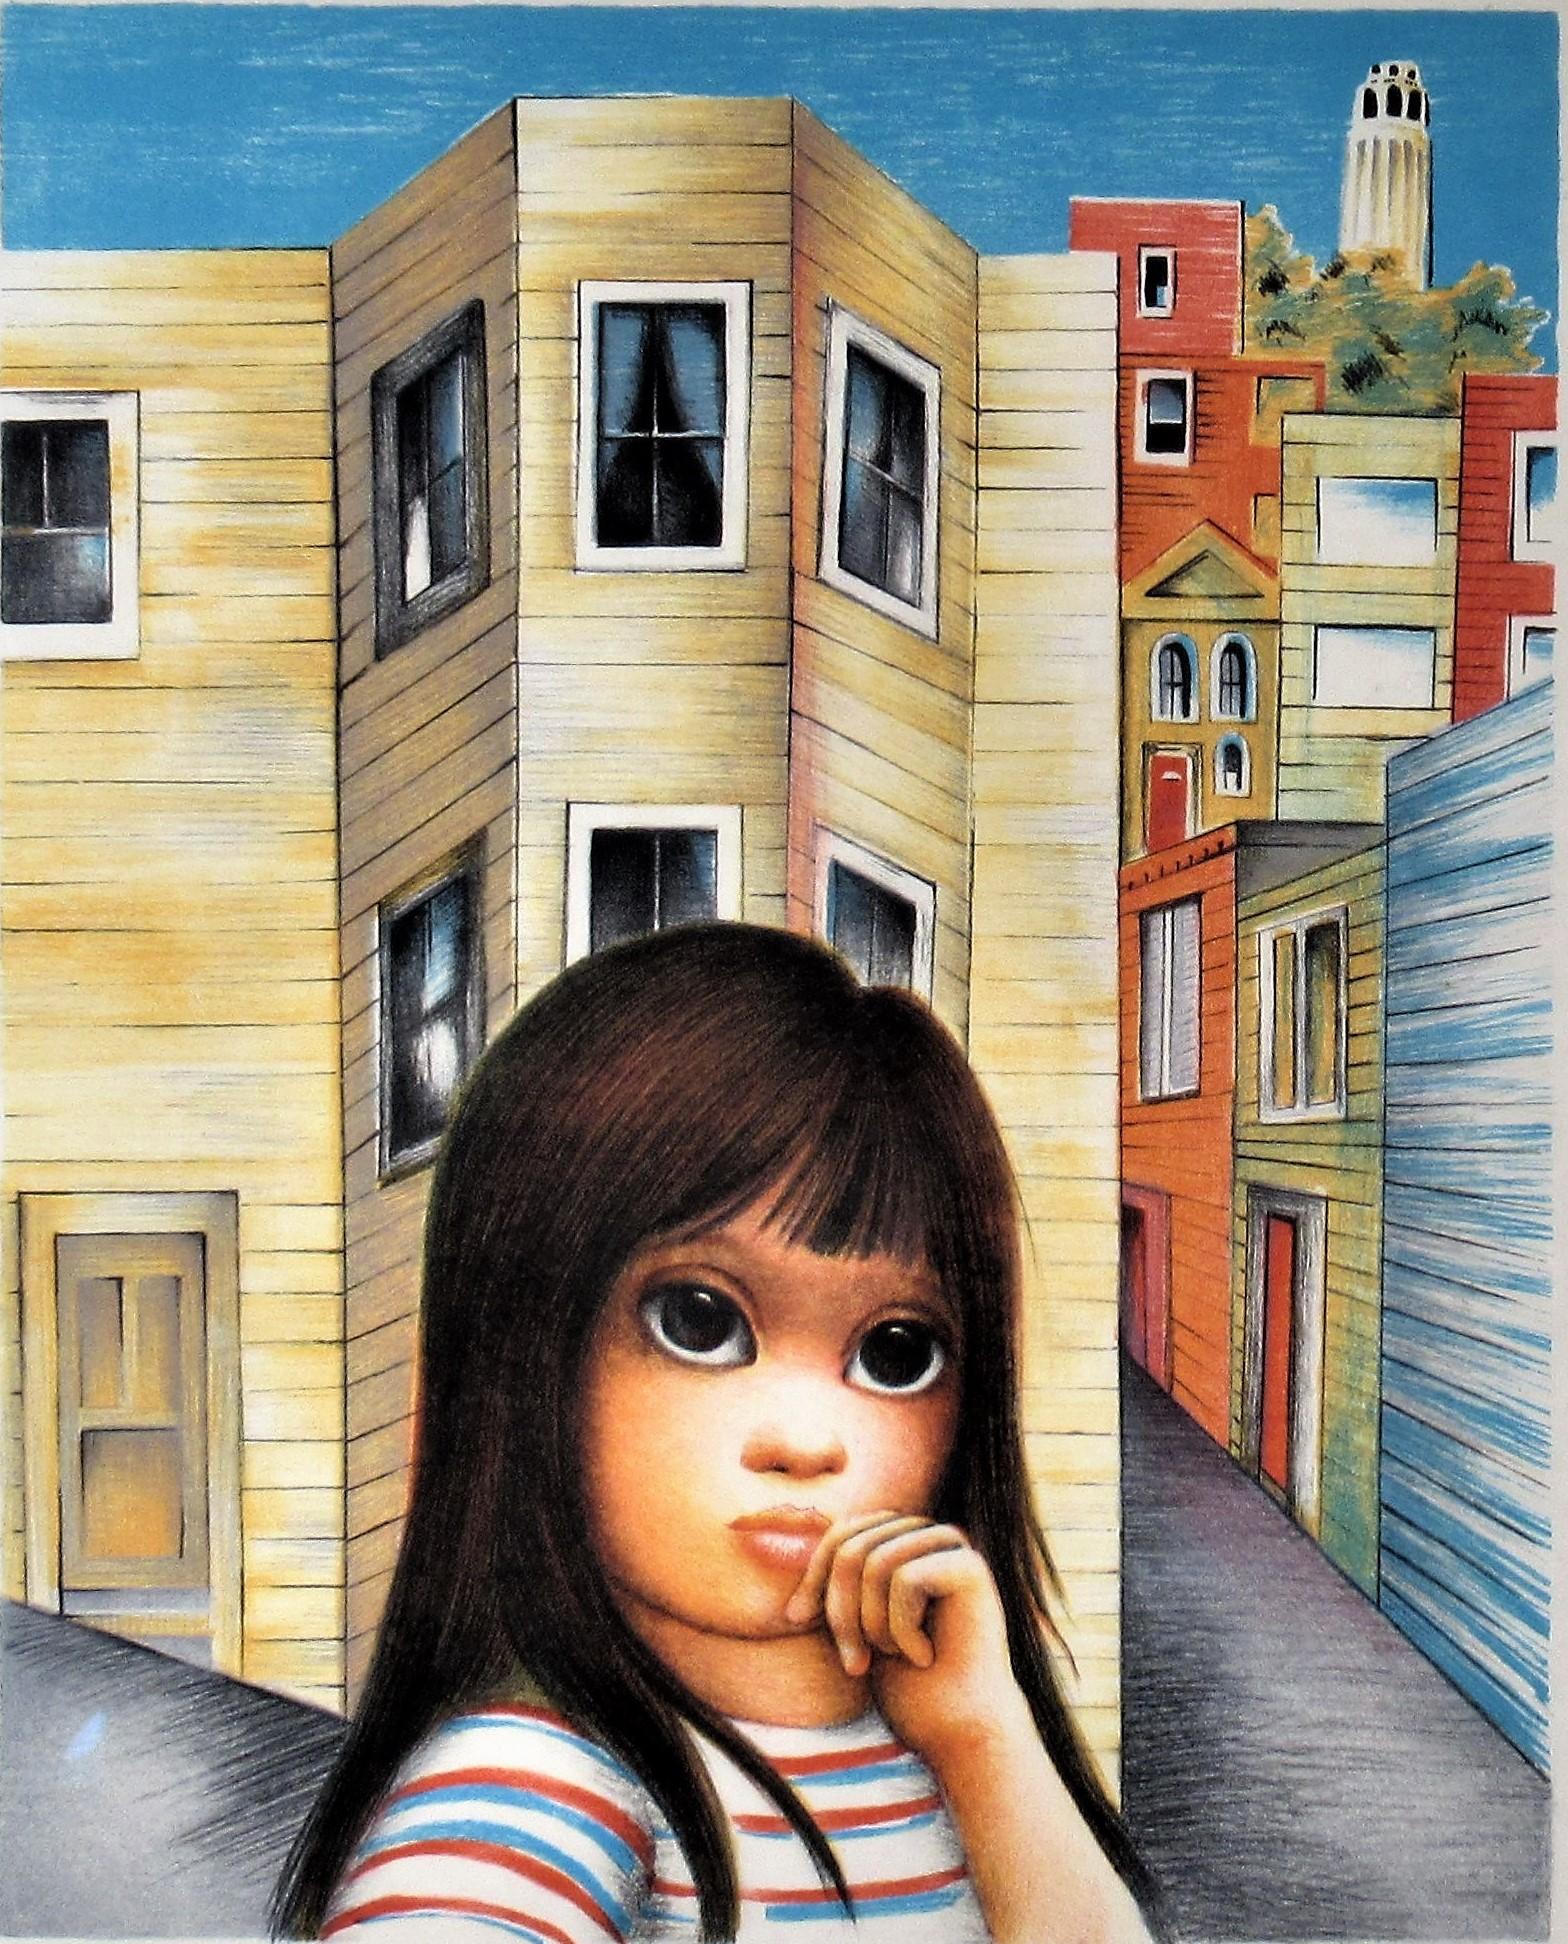 San Francisco Girl with Coit Tower - Print by Margaret Keane